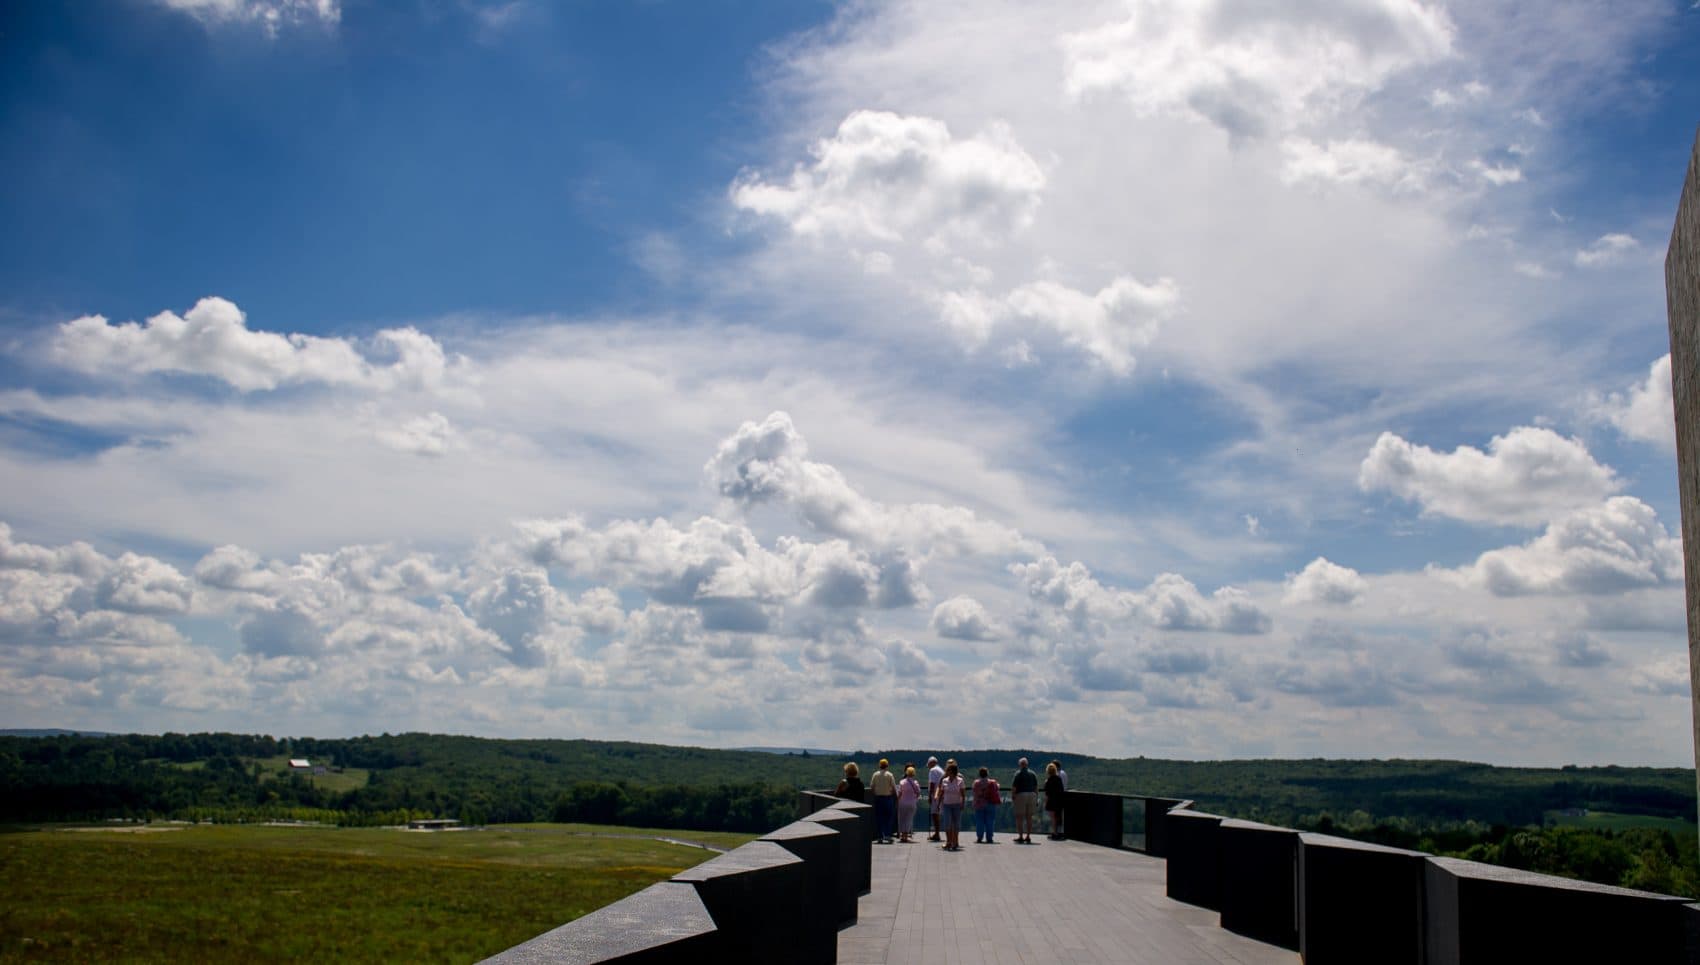 Visitors look over the flight path of Flight 93 at the Flight 93 National Memorial in Shanksville, Penn., on Aug. 19, 2016. (Jeff Swensen/Getty Images)